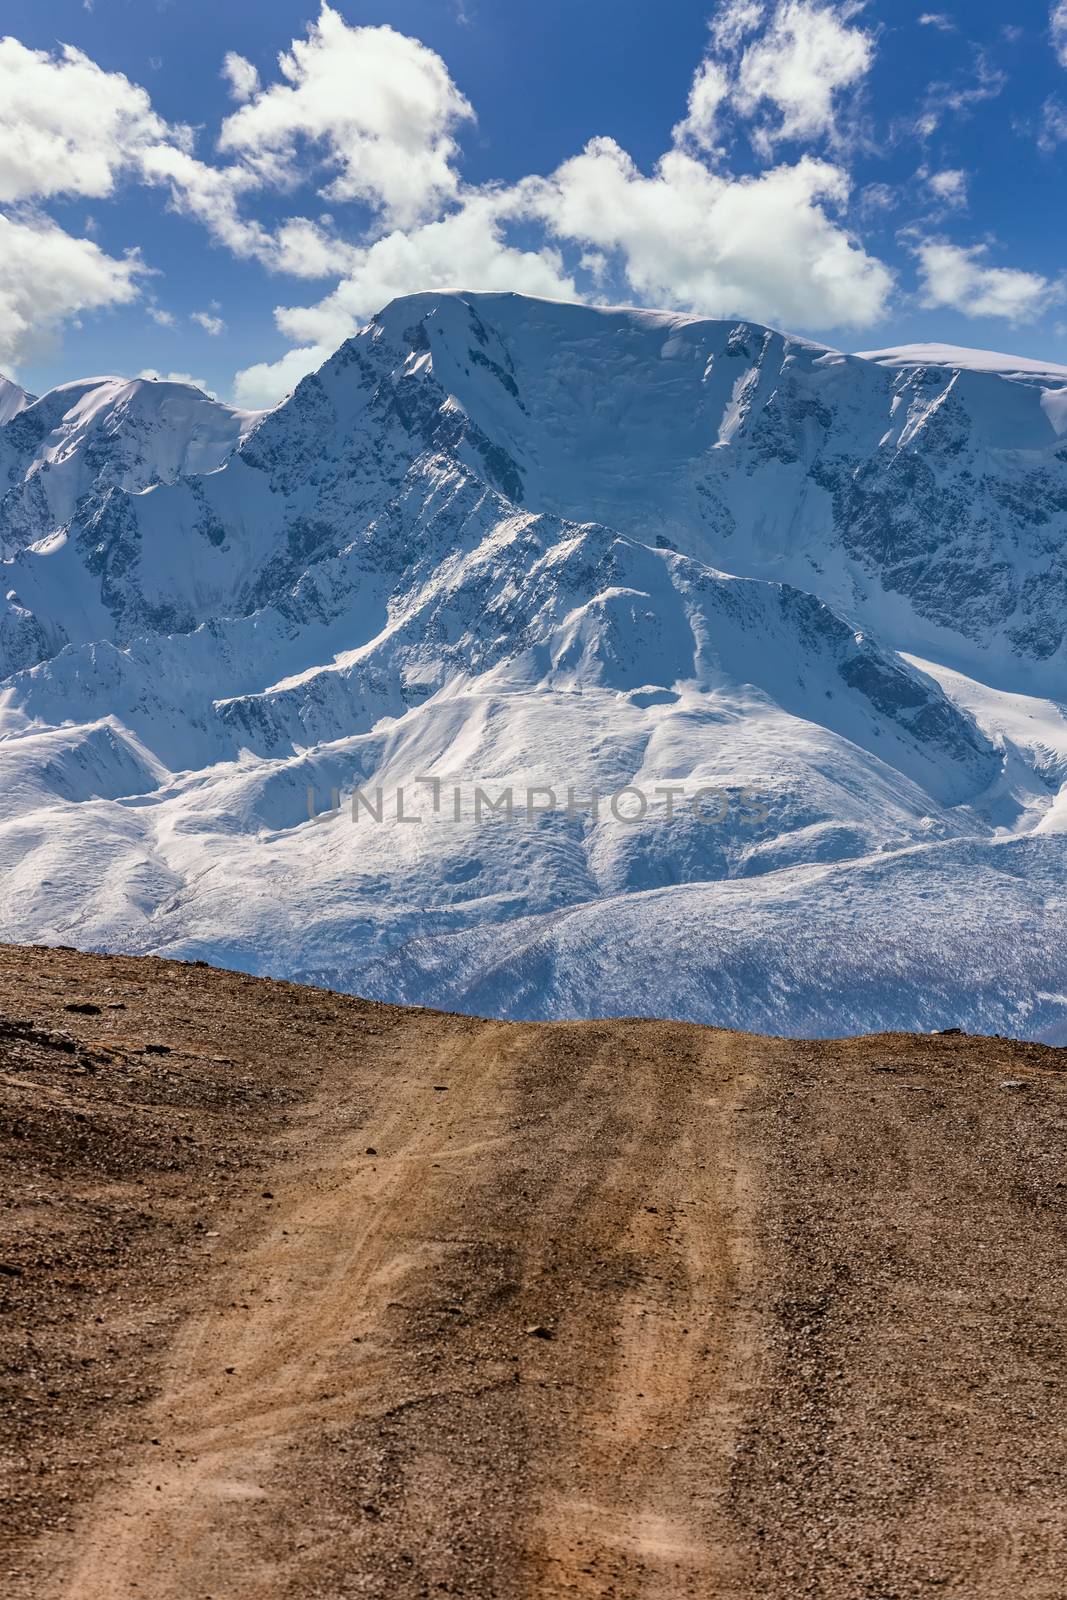 Portrait size landscape of a highland road leading to the snowy mountains of The North Chuyskiy mountain range. Beautiful blue cloudy sky as a background. Altai mountains, Siberia, Russia by DamantisZ